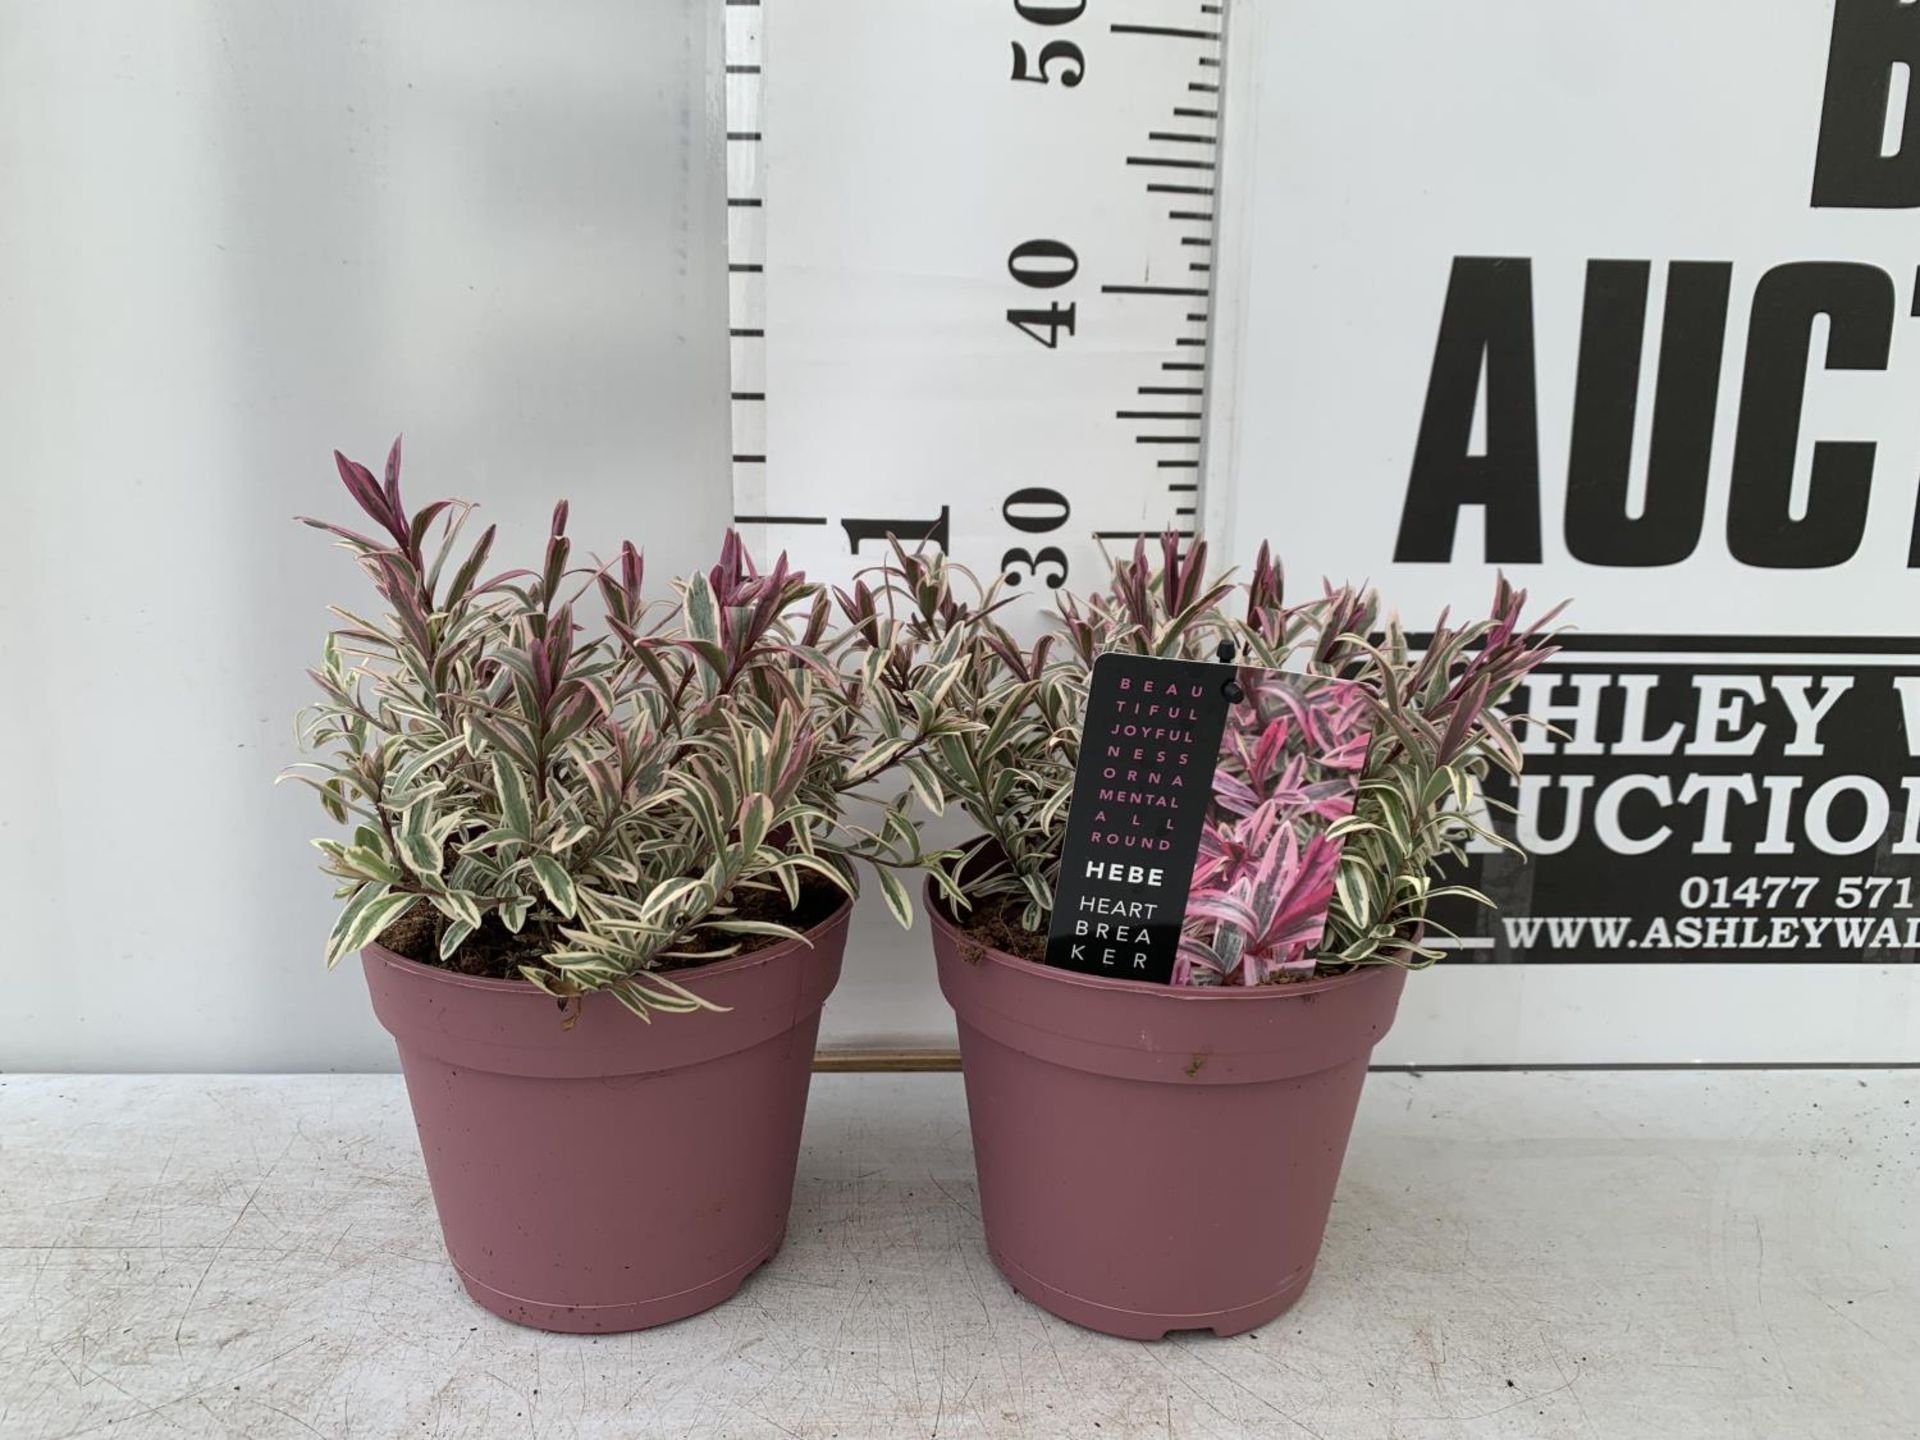 TWO HEBES MAGICOLOURS 'HEARTBREAKER' APPROX 30CM IN HEIGHT IN 2 LTR POTS PLUS VAT TO BE SOLD FOR THE